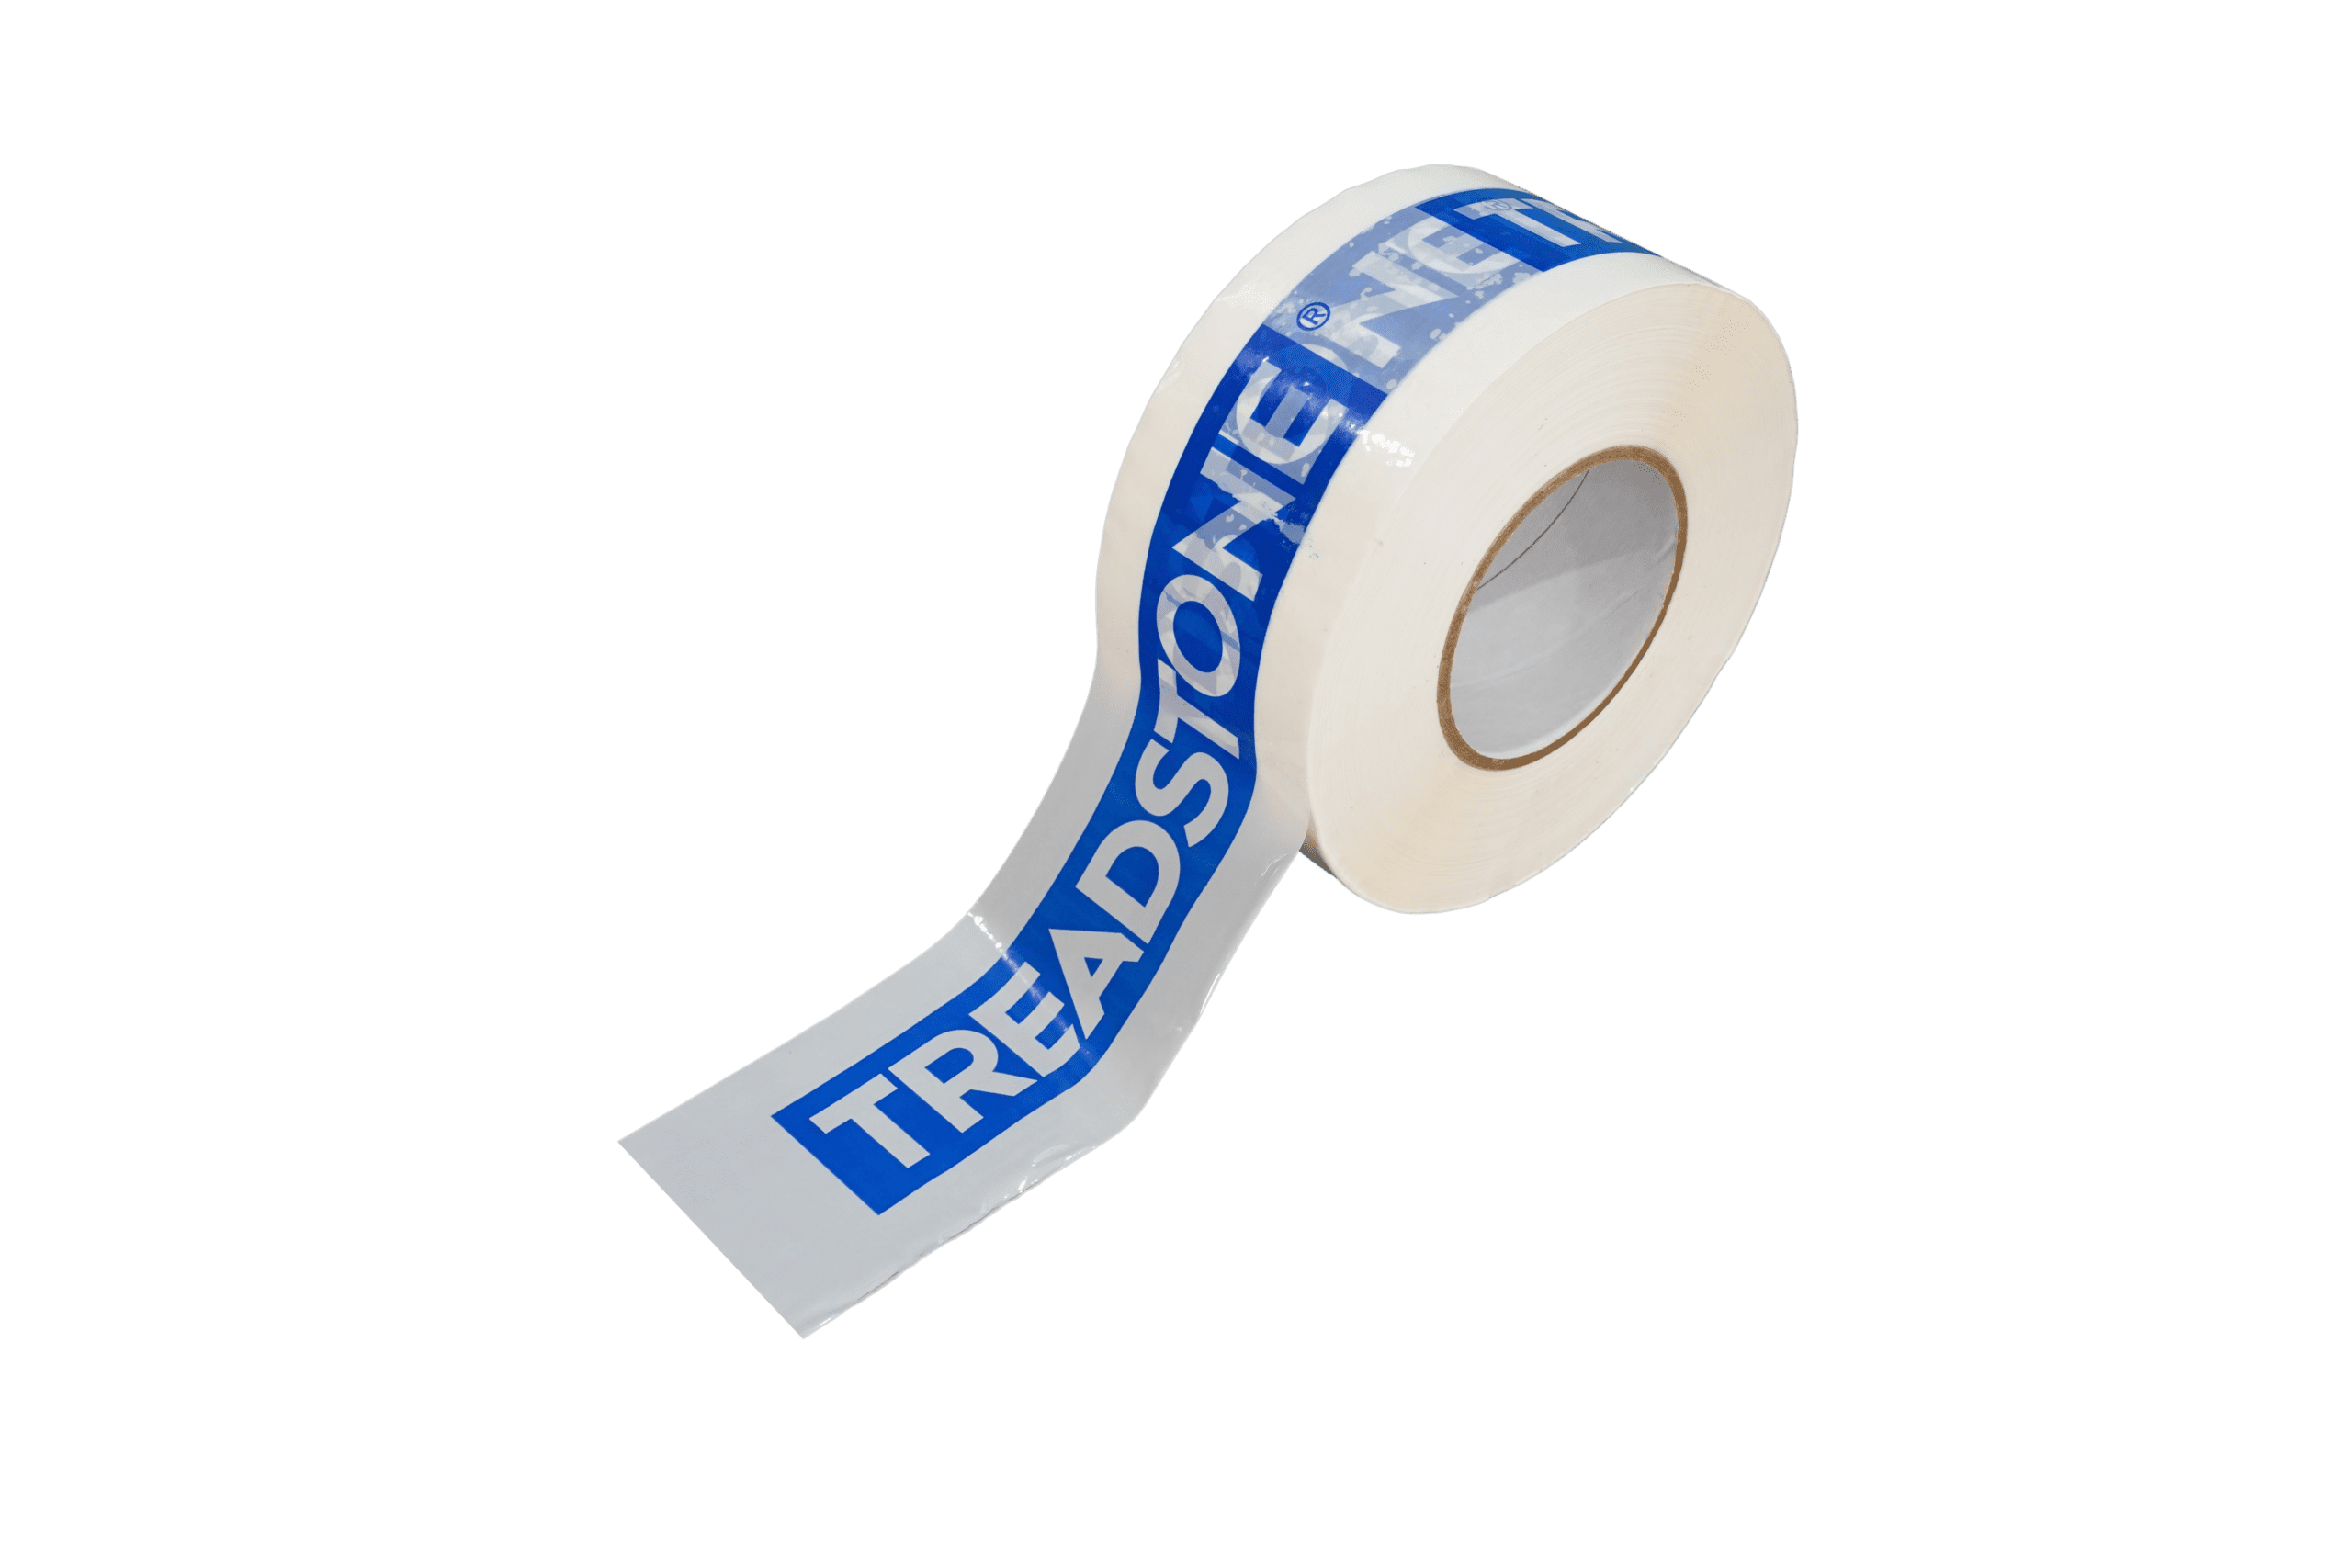 Treadstone® Joint Tape - vertical view